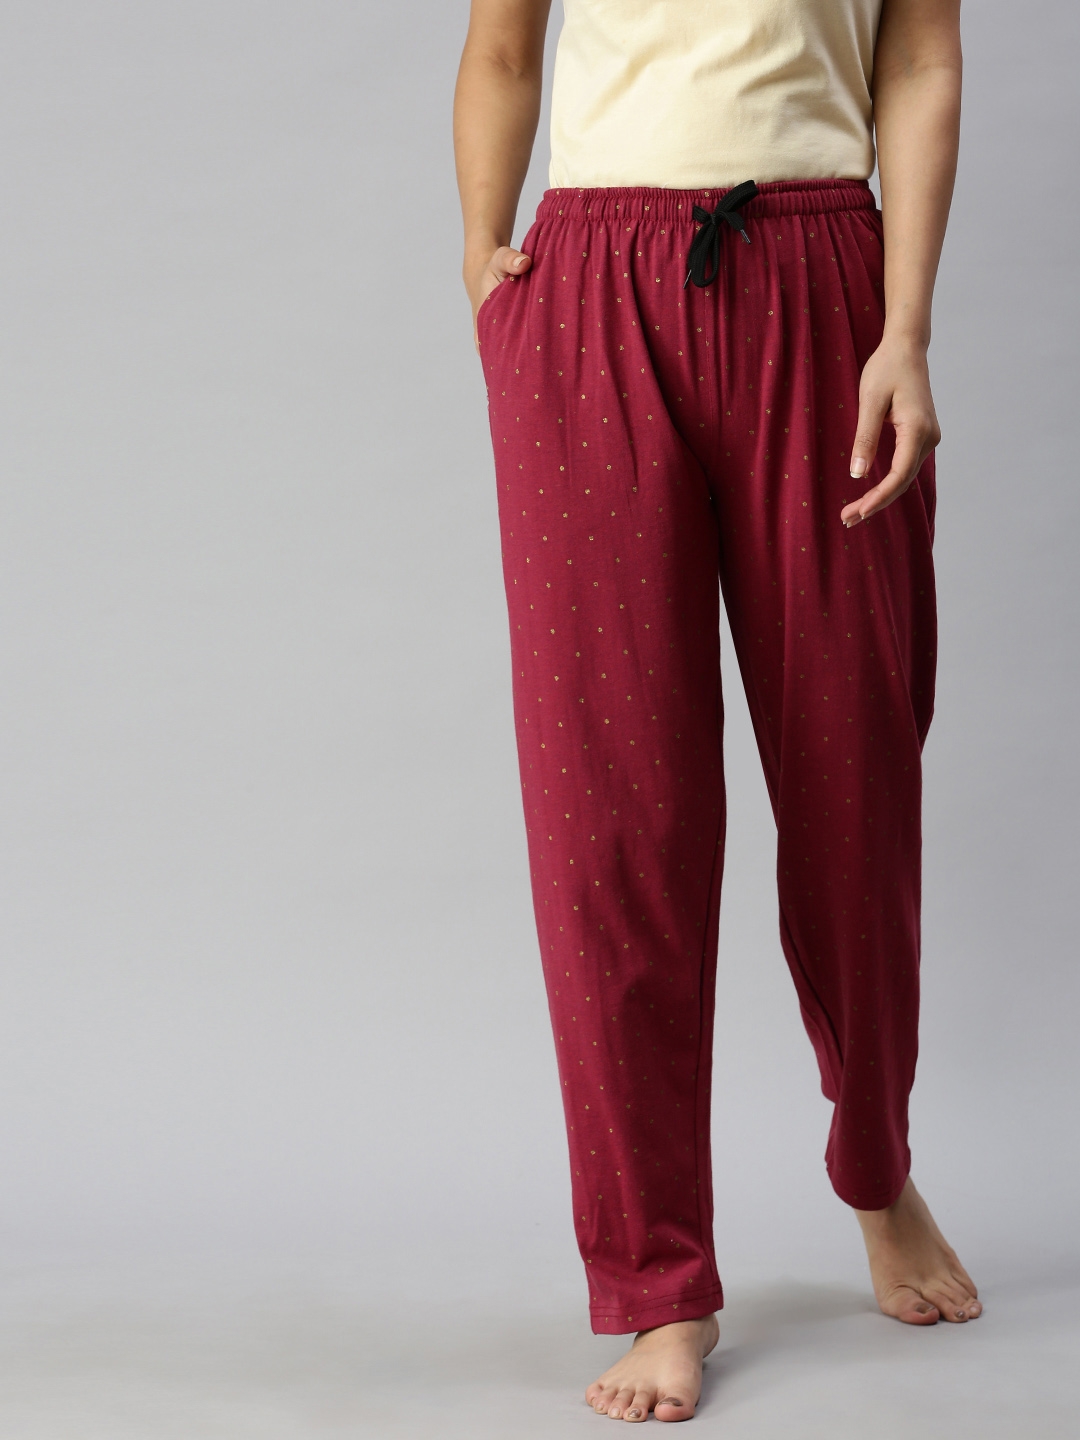 New Ladies Full Length Long Cherry Berry Trouser Pant Cotton Stretchy  Casual UK | eBay